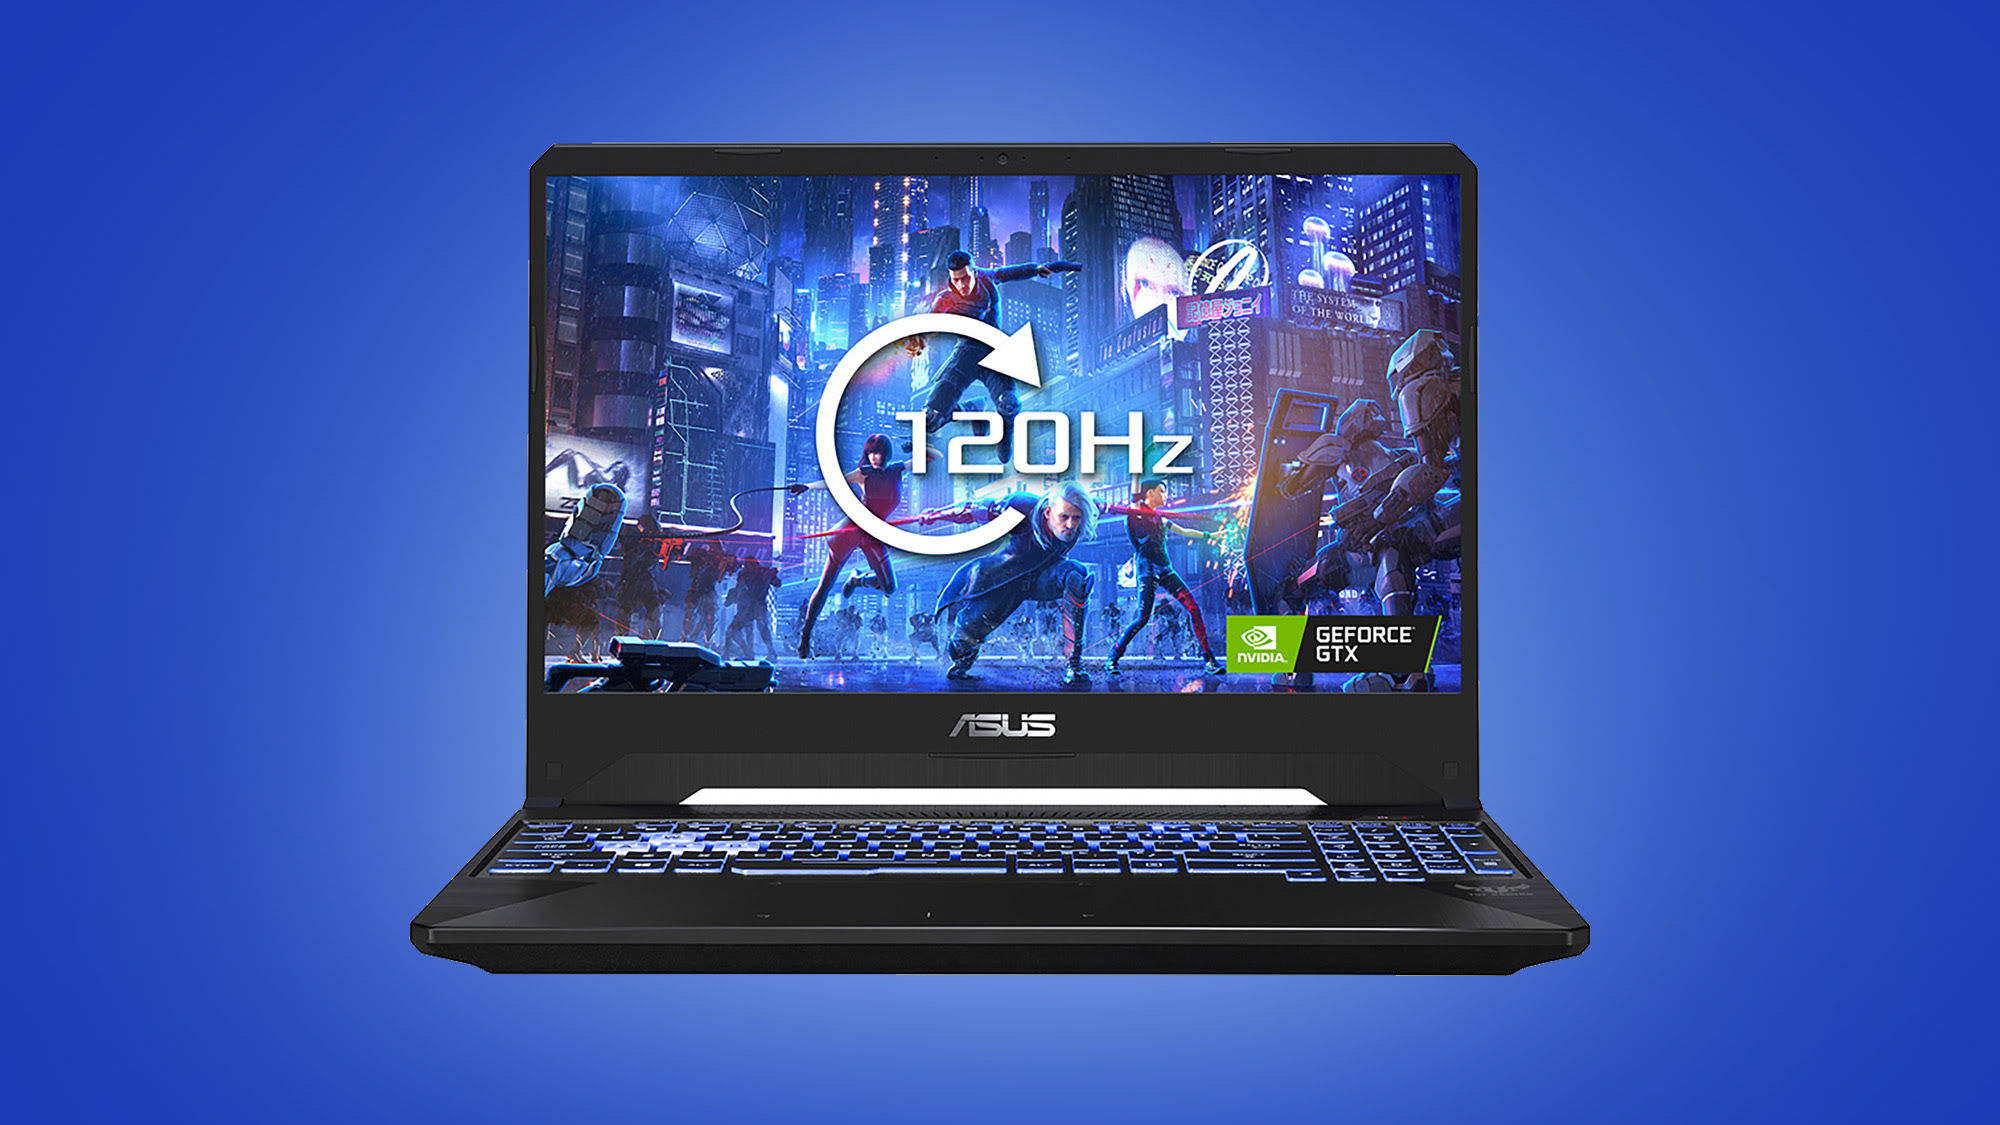 Get a gaming laptop with an RTX 3060 graphics card for just £799